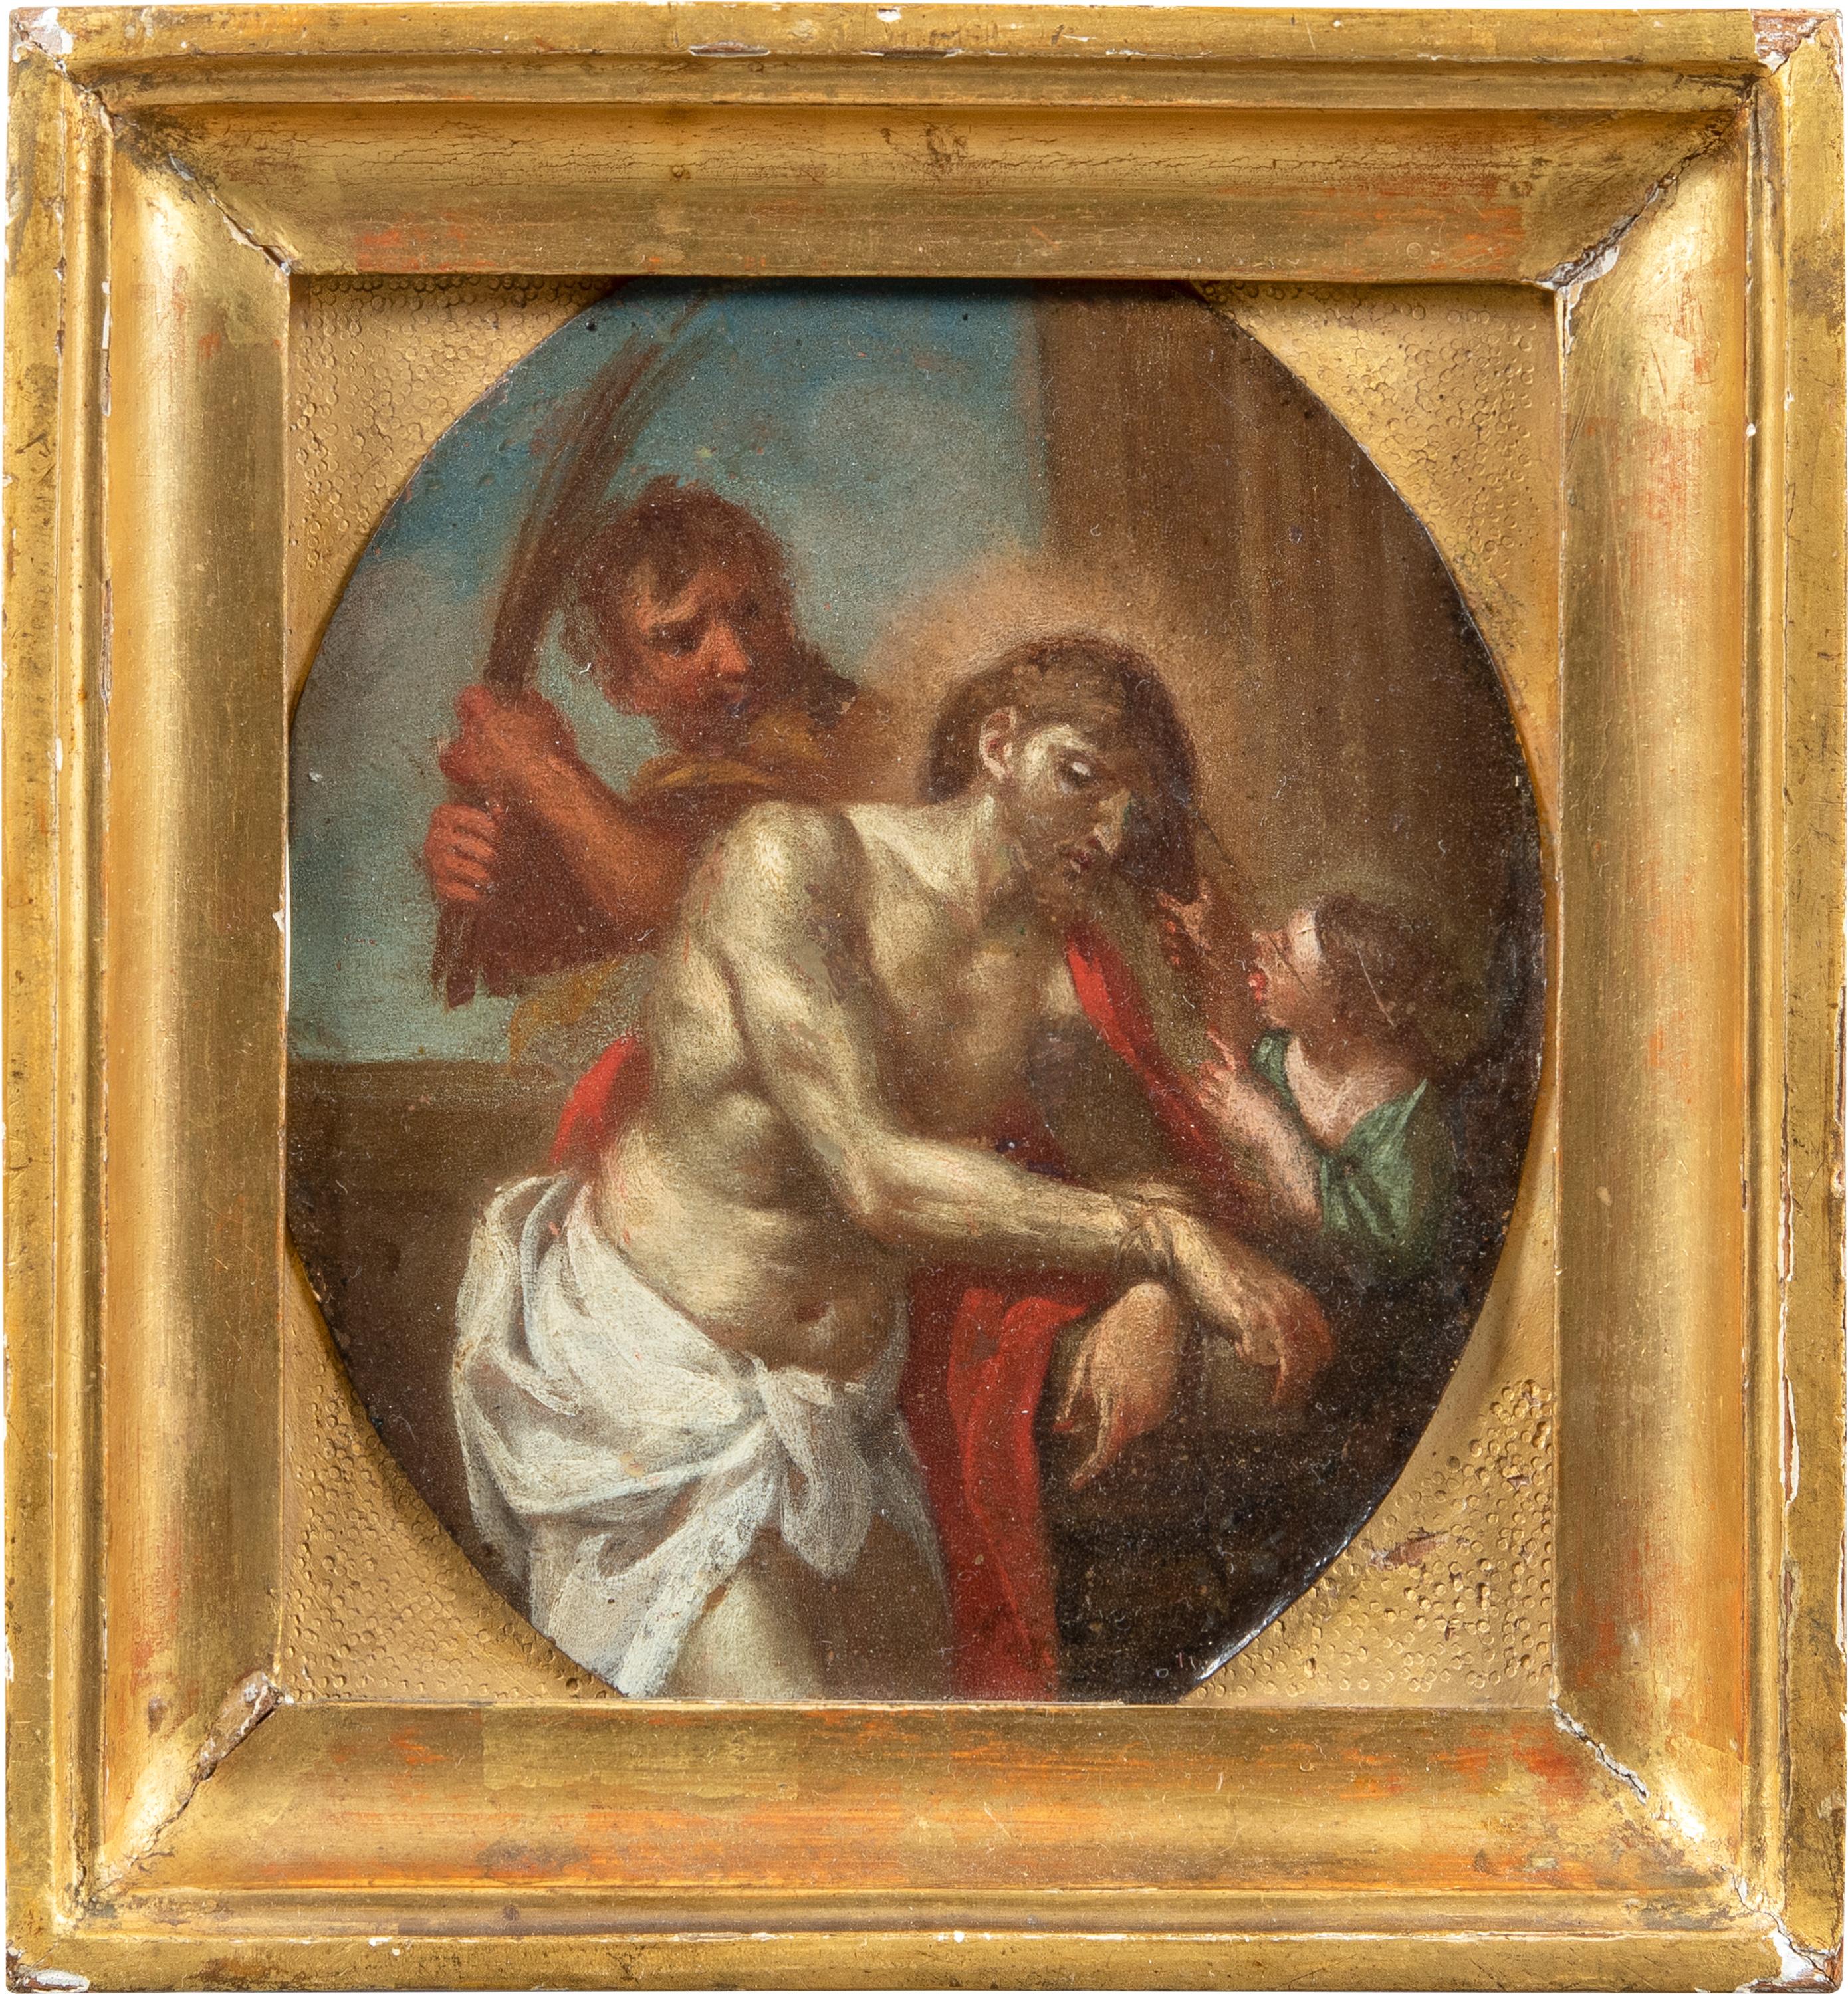 Unknown Figurative Painting - Italian painter (Copper plate) - 18th century figure painting - Flagellation